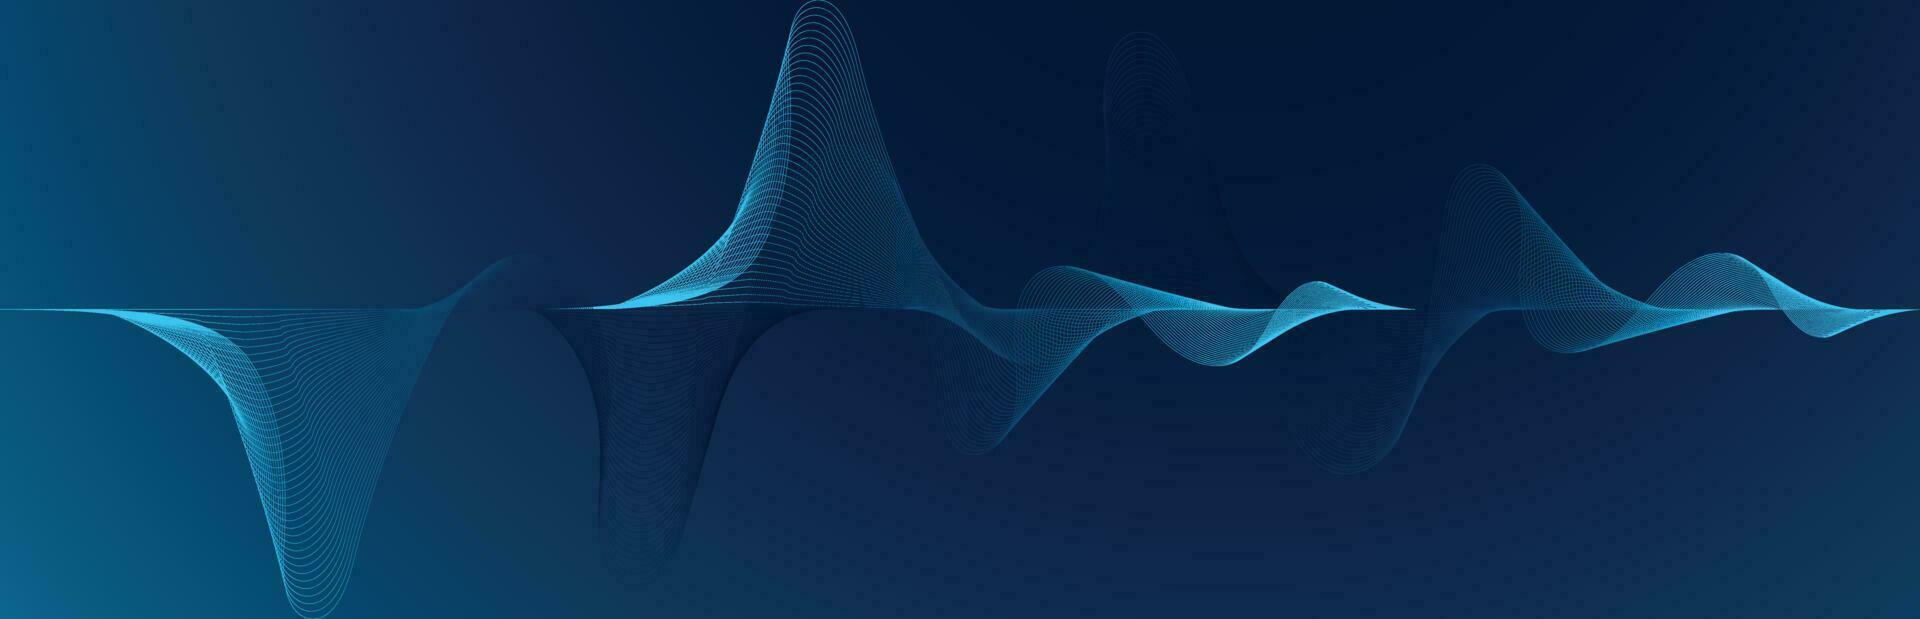 abstract blue wave background. Blue minimal round lines abstract background. Abstract blue wave lines pattern background vector